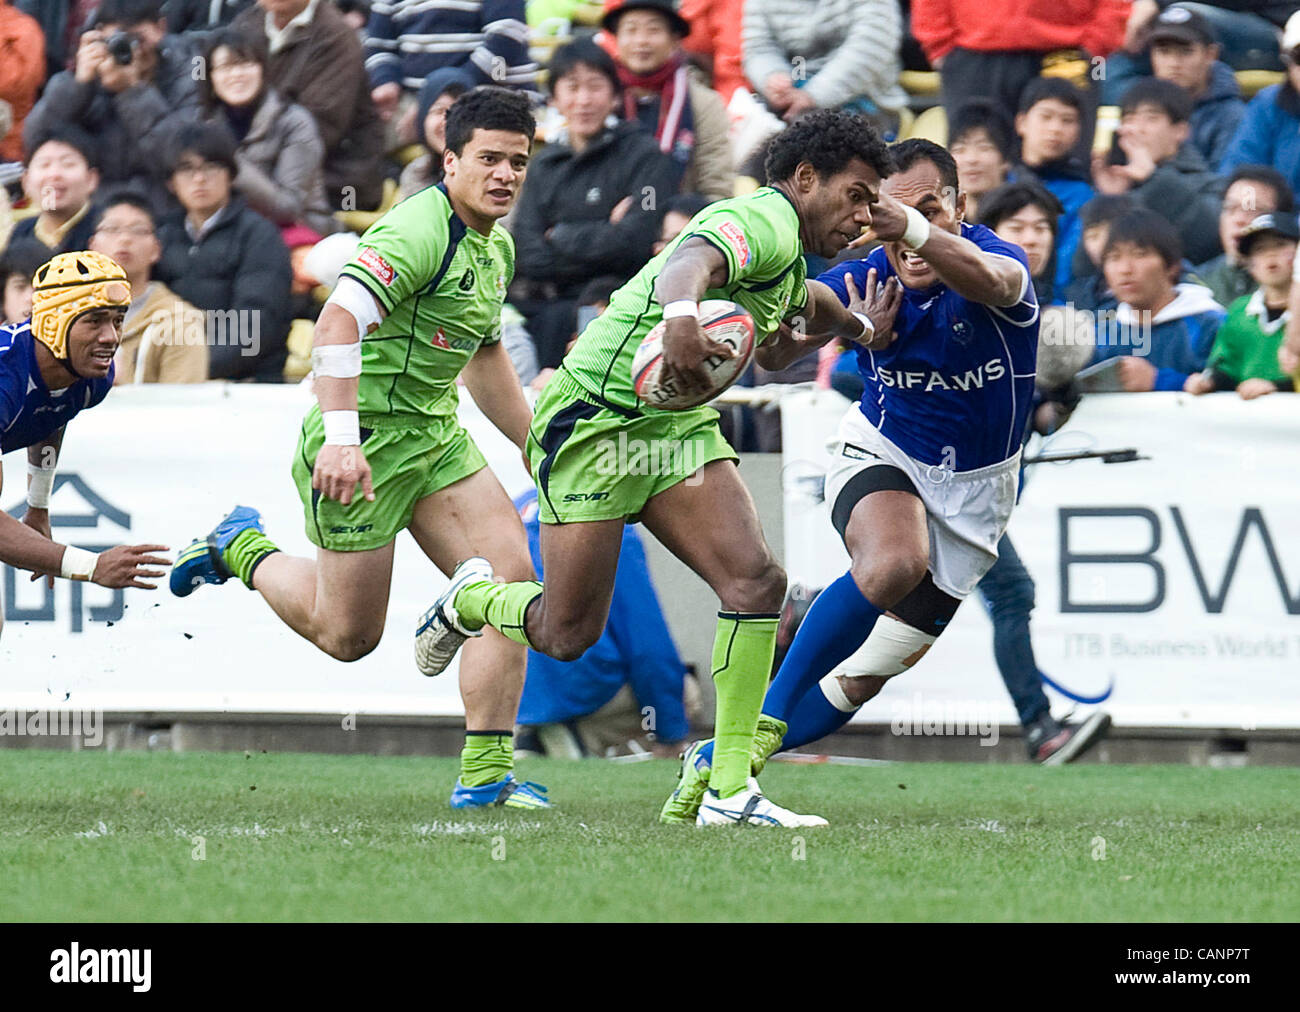 Australia's Shannon Walker brushes off a challenge from Samoa's Uale Mai to score the first fo his two tries during the cup final of  the rugby 7s world series in Tokyo, Japan on 01 April, 2012. Australia won the match 28-26.  Photographer: Robert Gilhooly Stock Photo